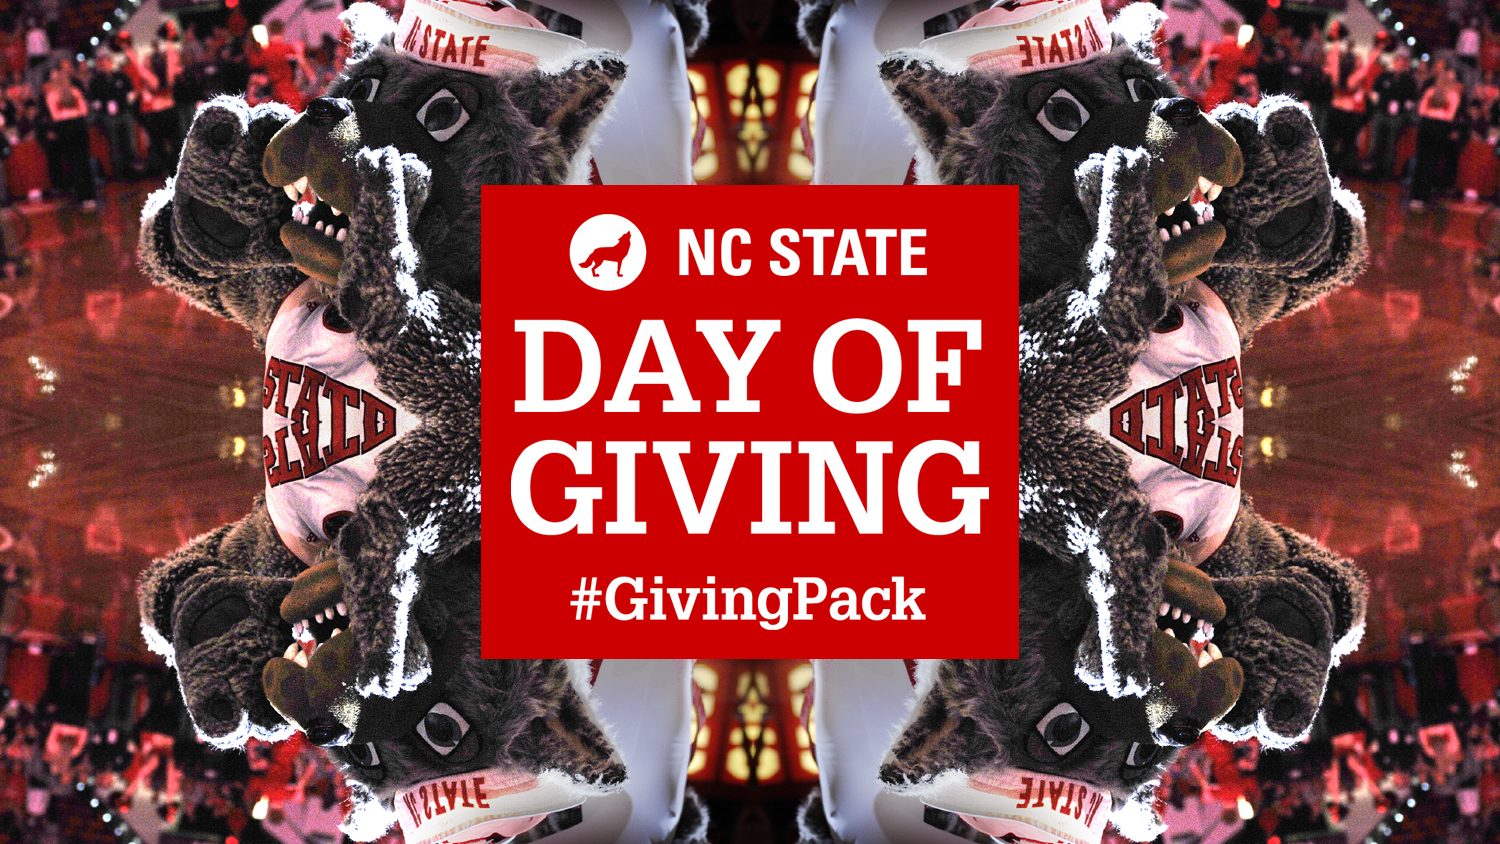 [Live Updates] Join Us in GivingPack on NC State’s Day of Giving